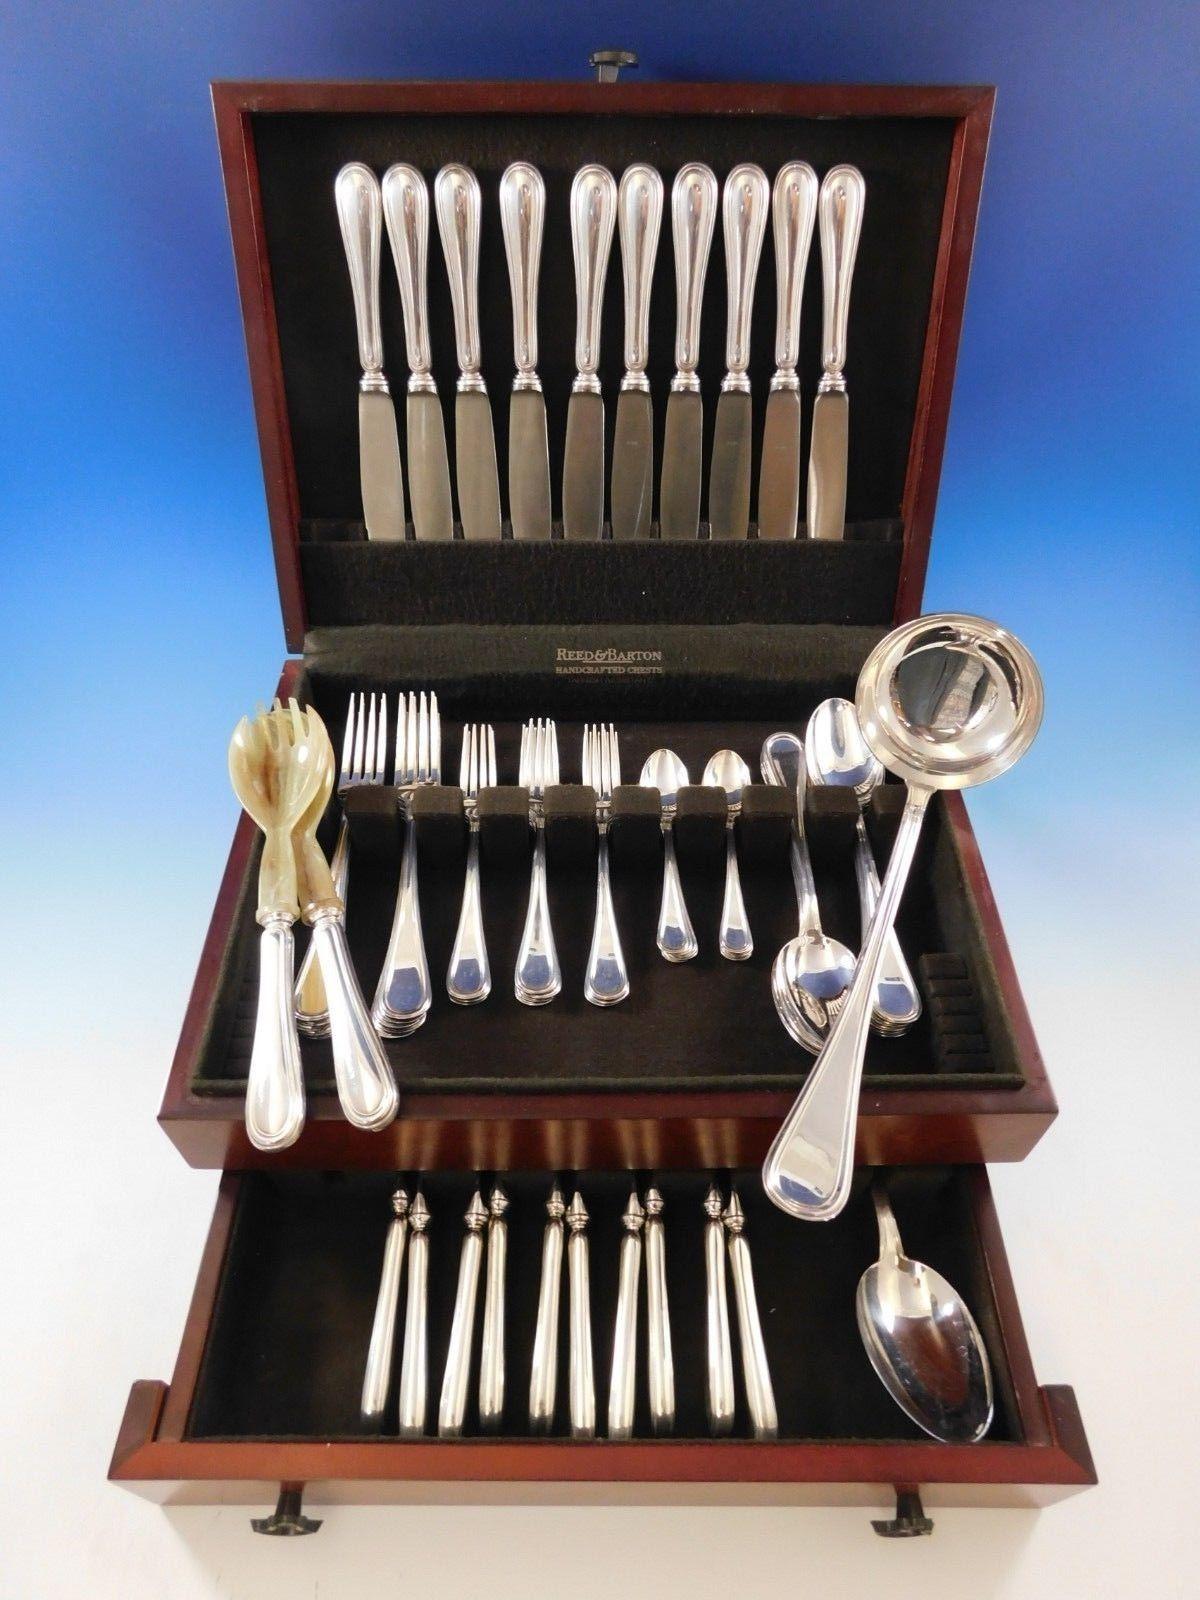 Outstanding dinner size Giorgio by Zaramella Argenti Italy 800 silver flatware set, 63 pieces. This set includes:

Ten dinner size knives, 9 3/4